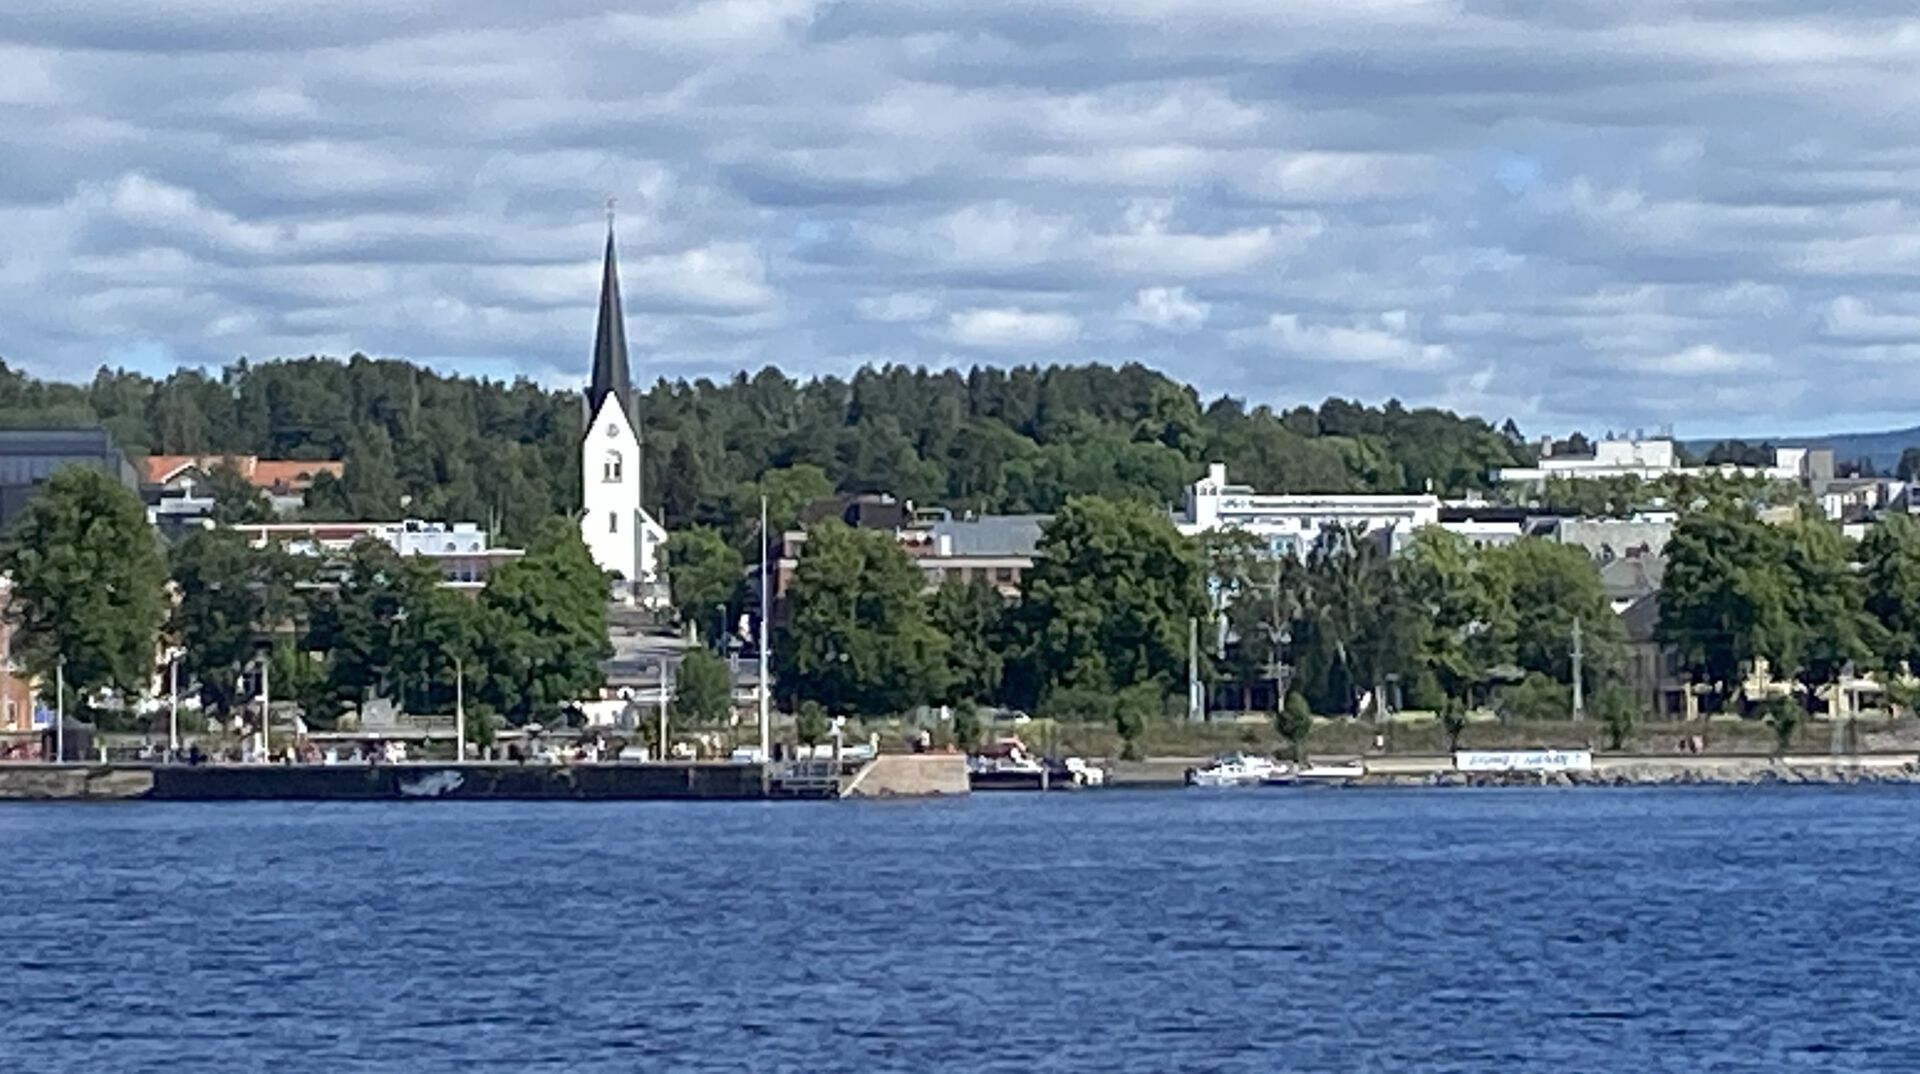 Hamar city centre pictured from the direction of lake Mjøsa